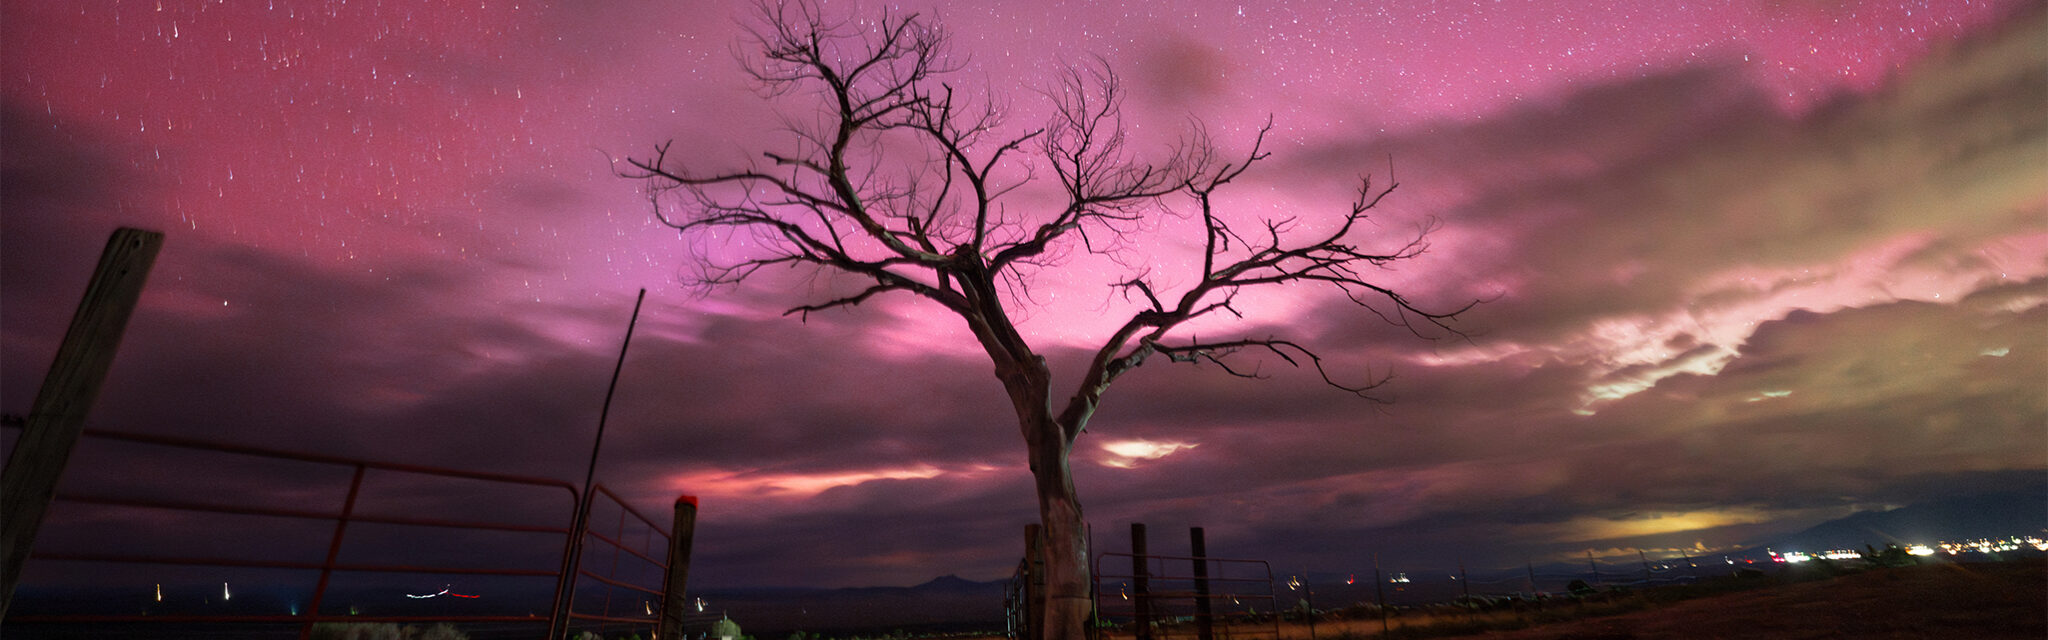 The aurora borealis shines magenta behind the silhouette of an old, dead tree.